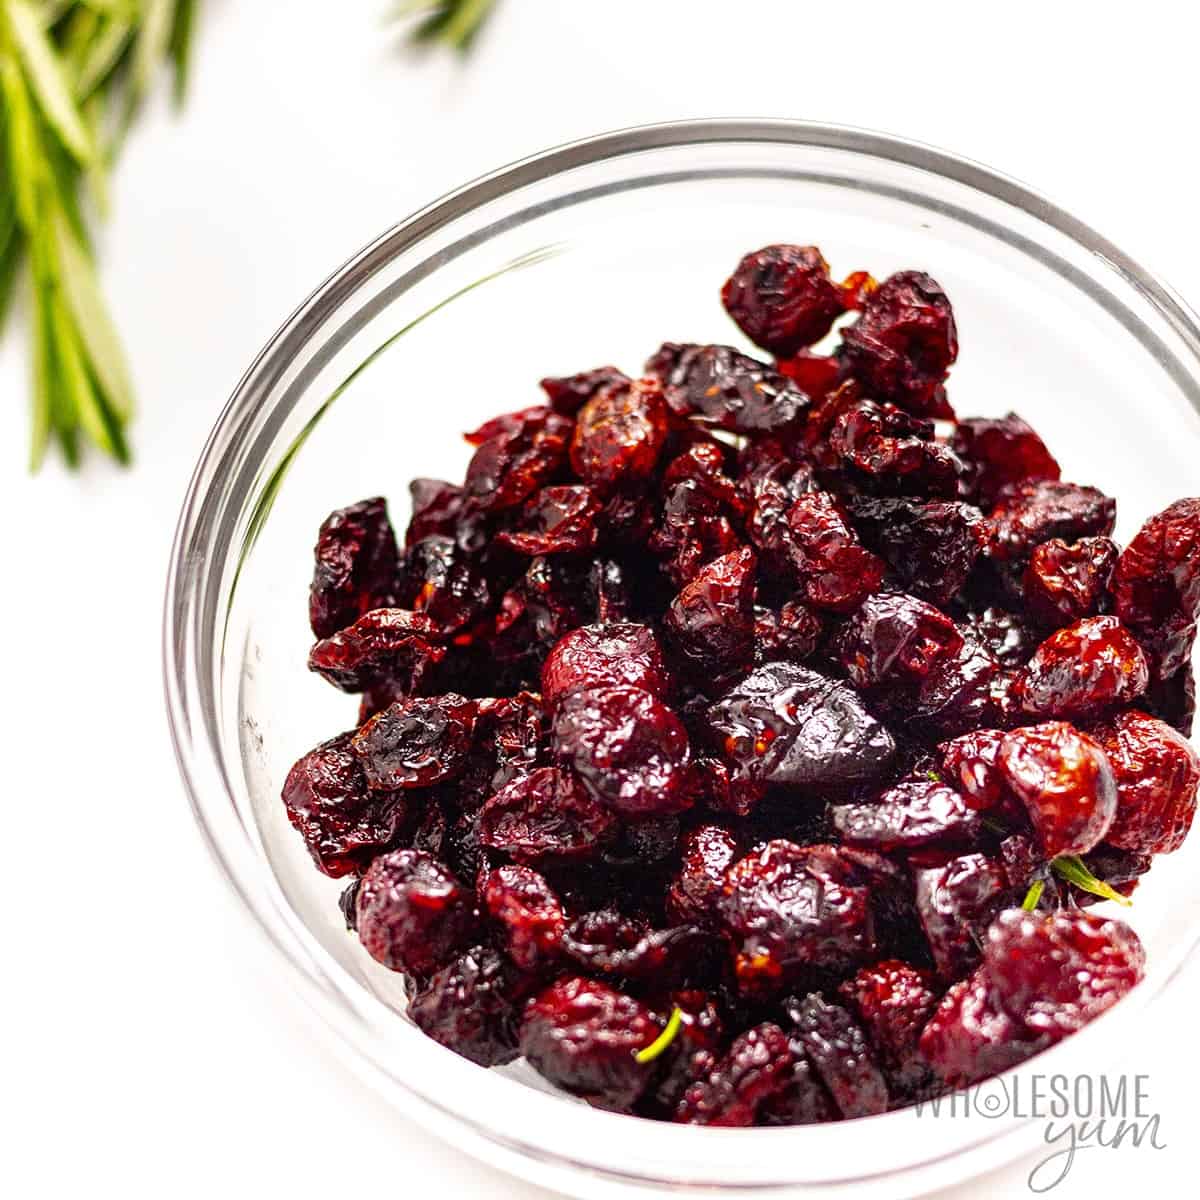 wholesomeyum How To Dry Cranberries Sugar Free Dried Cranberries Recipe 17